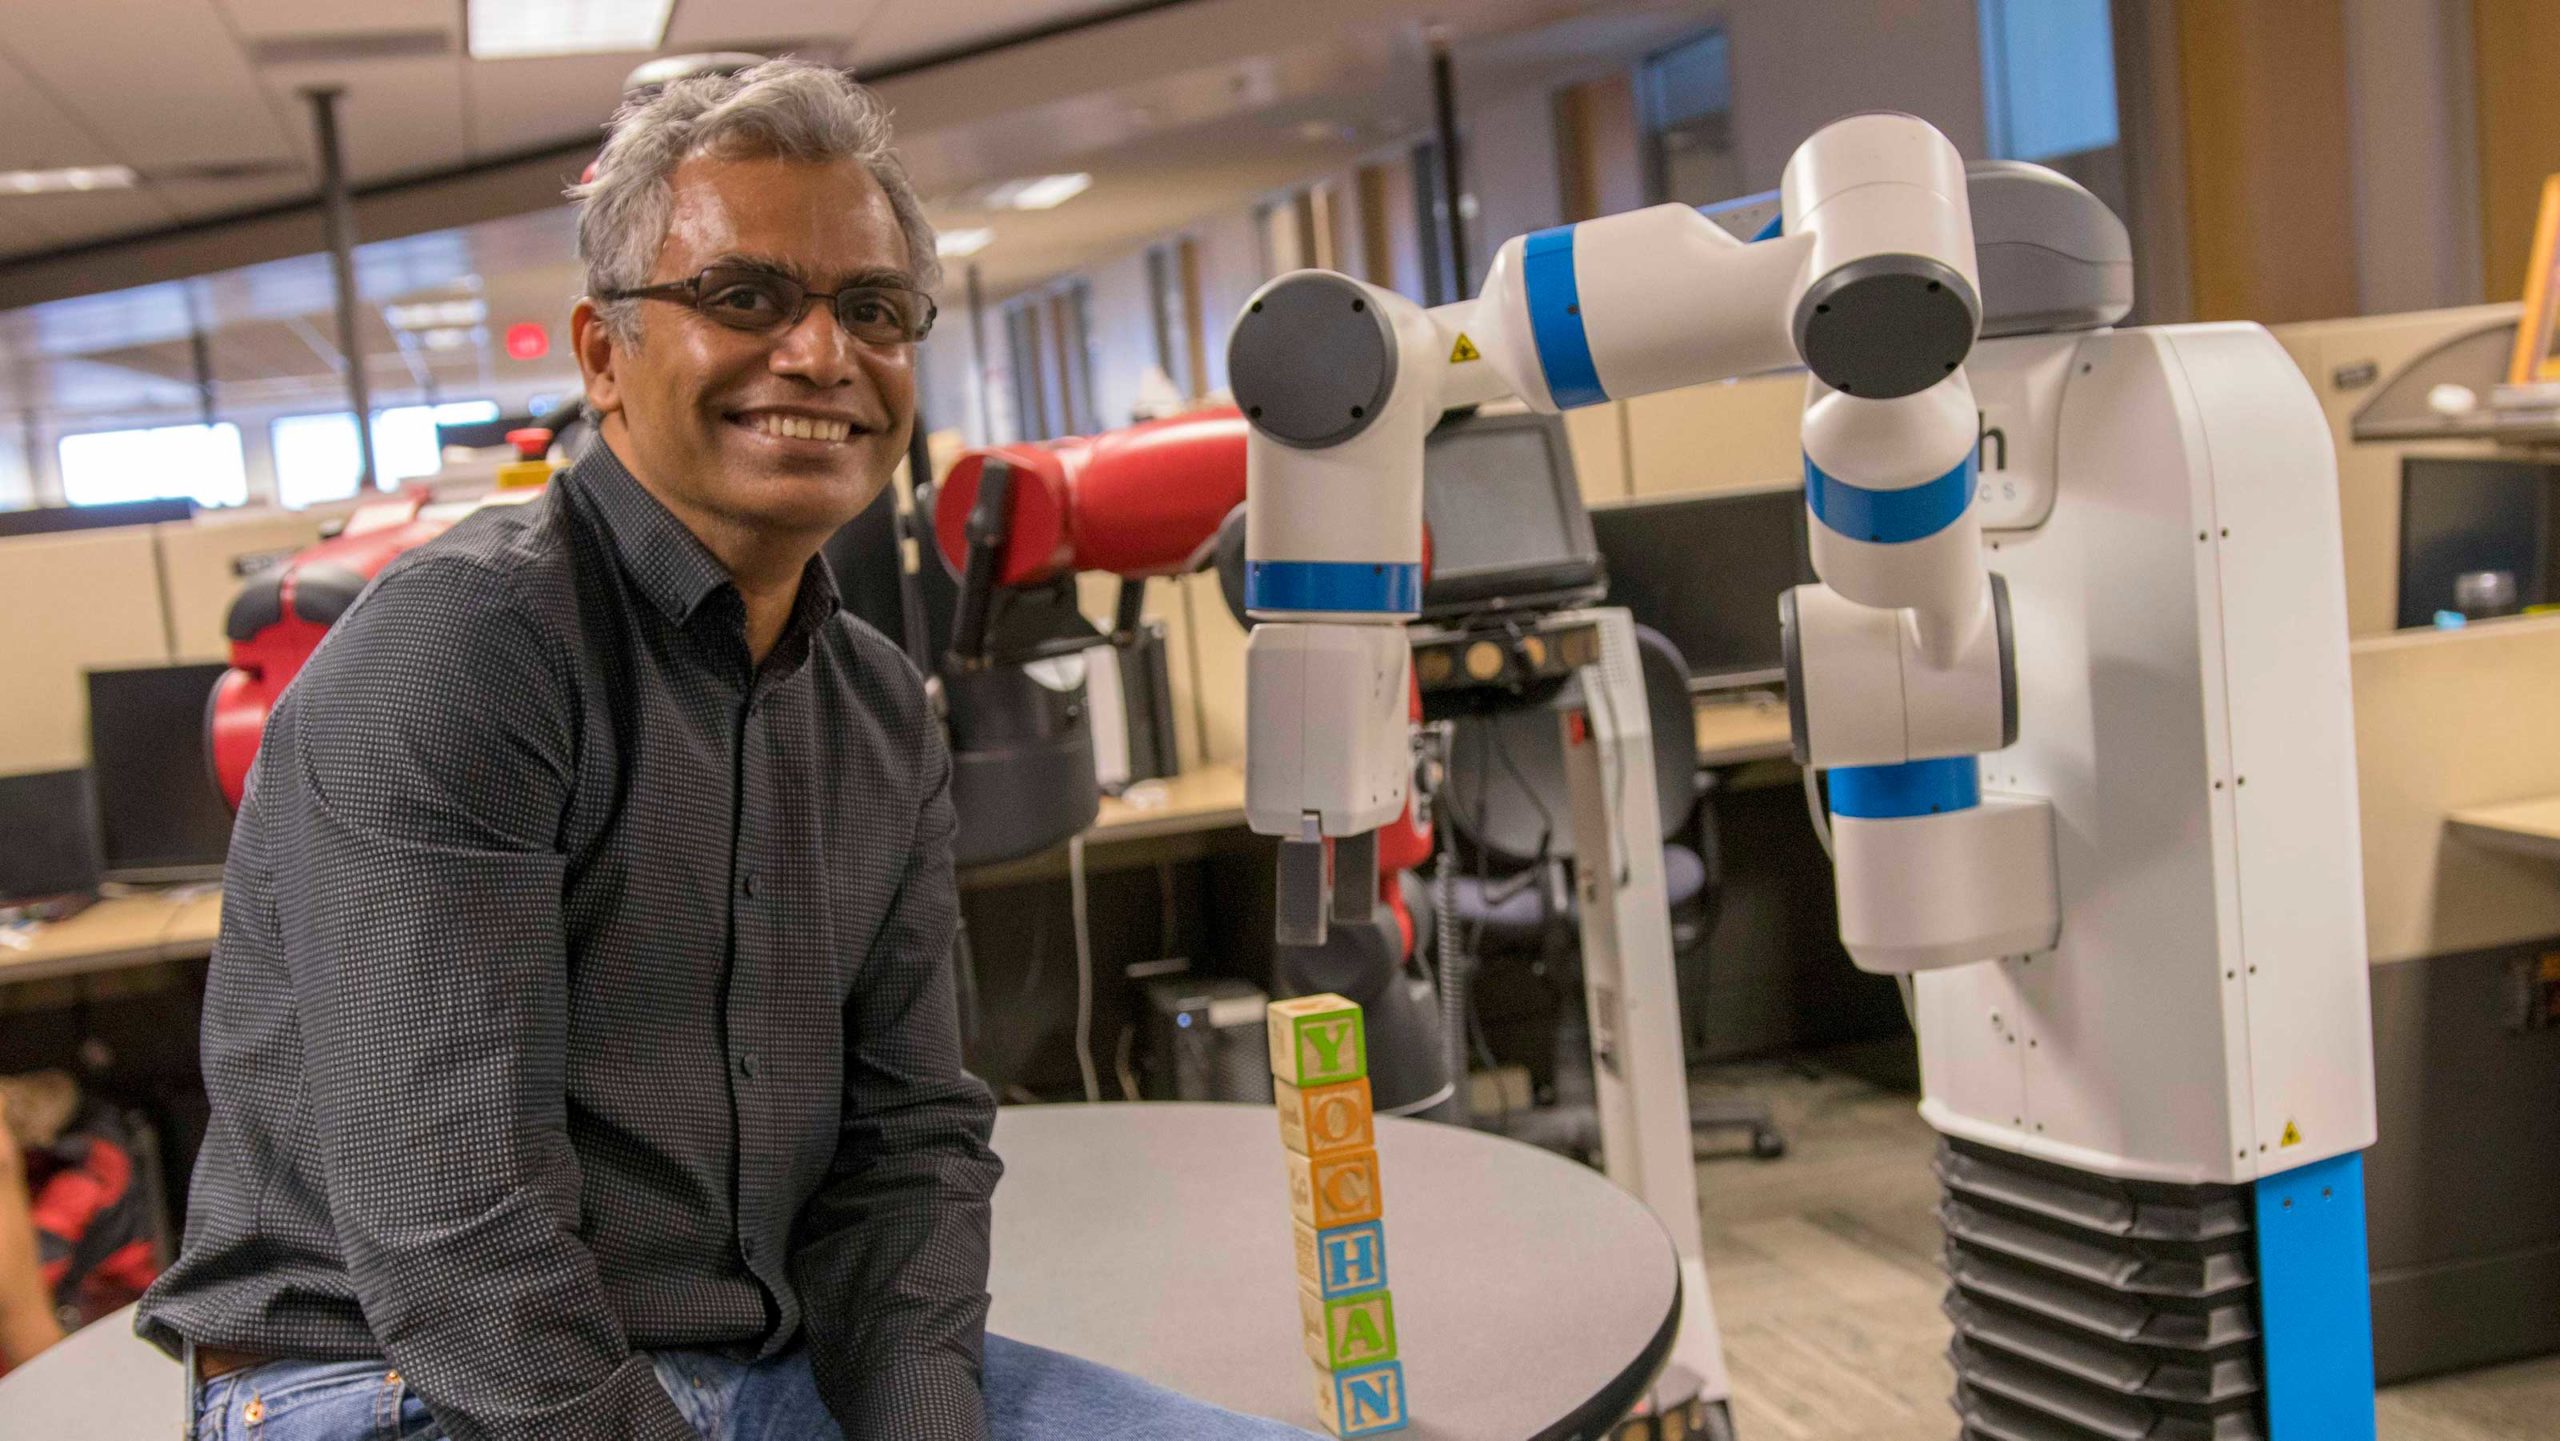 Rao Kambhampati poses for the camera in his lab next to a robot that has just stacked some alphabet blocks